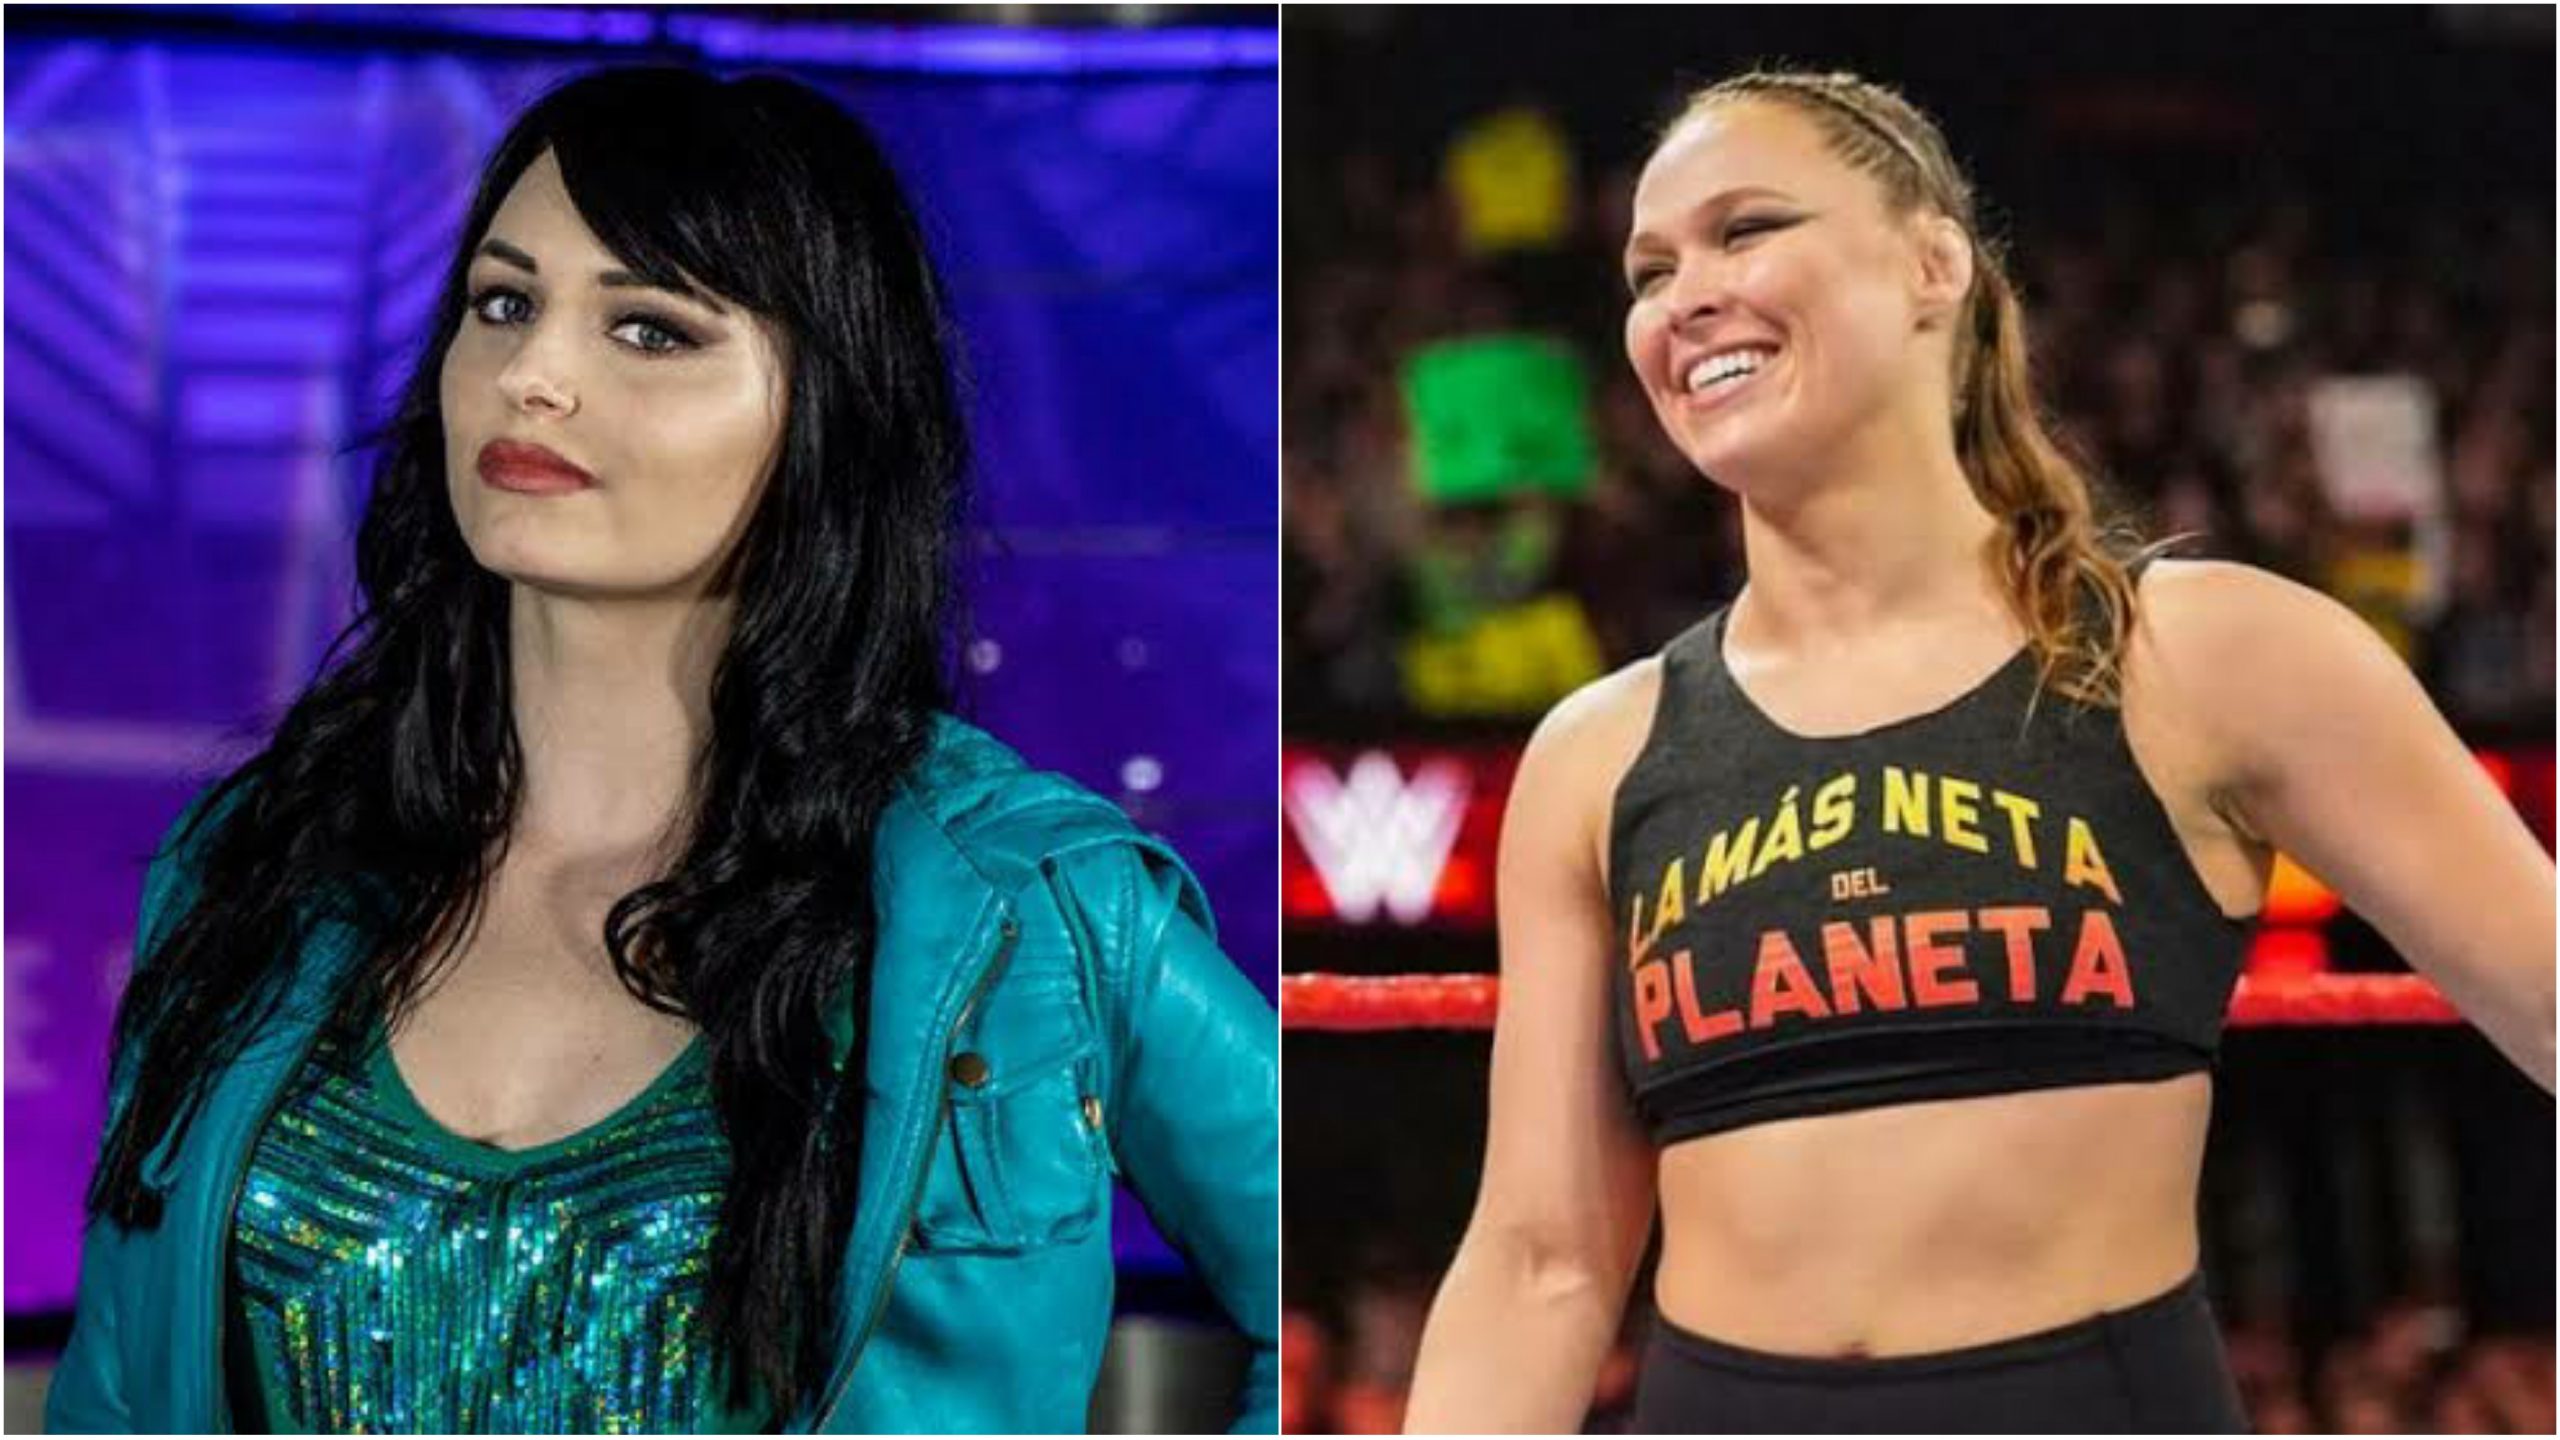 Here's why Teal Piper was spotted training with Ronda Rousey